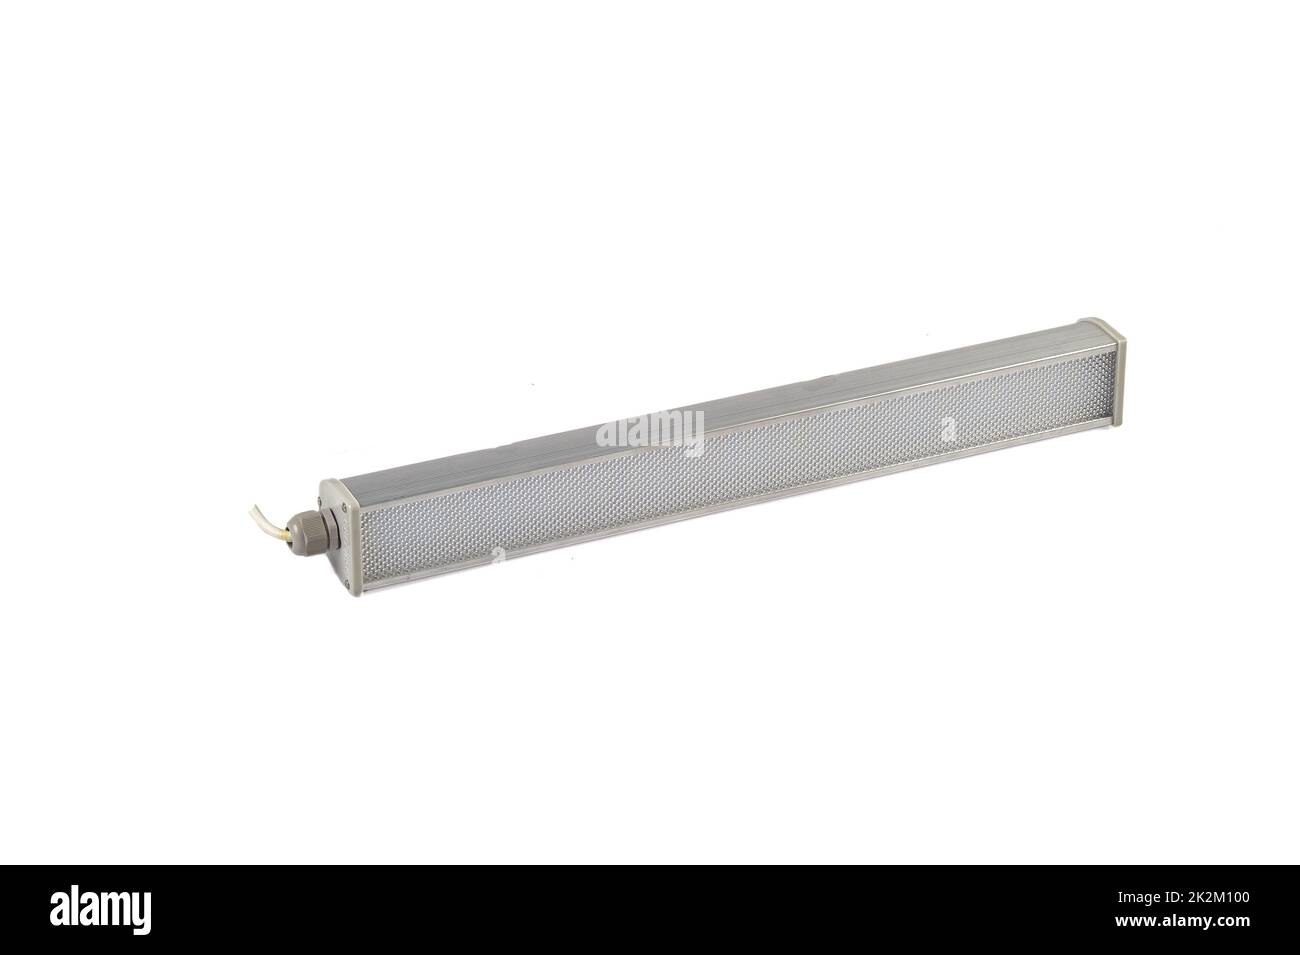 LED lamp for non-residential and public spaces on a white isolated background. Power saving Stock Photo